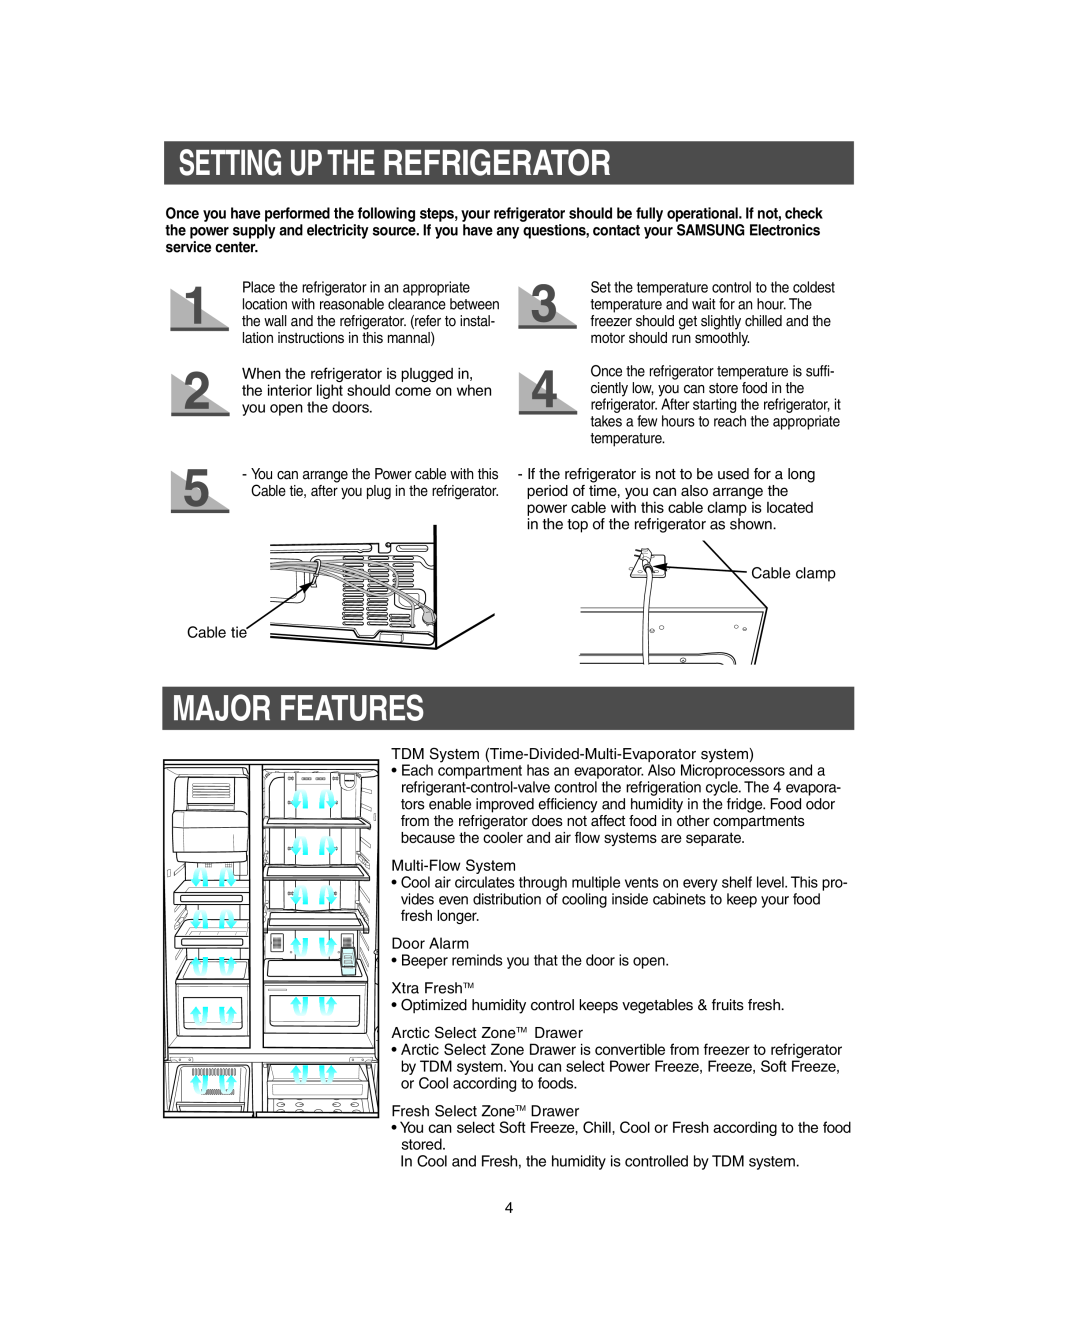 Samsung RM255LARS owner manual Setting Up The Refrigerator, Major Features 